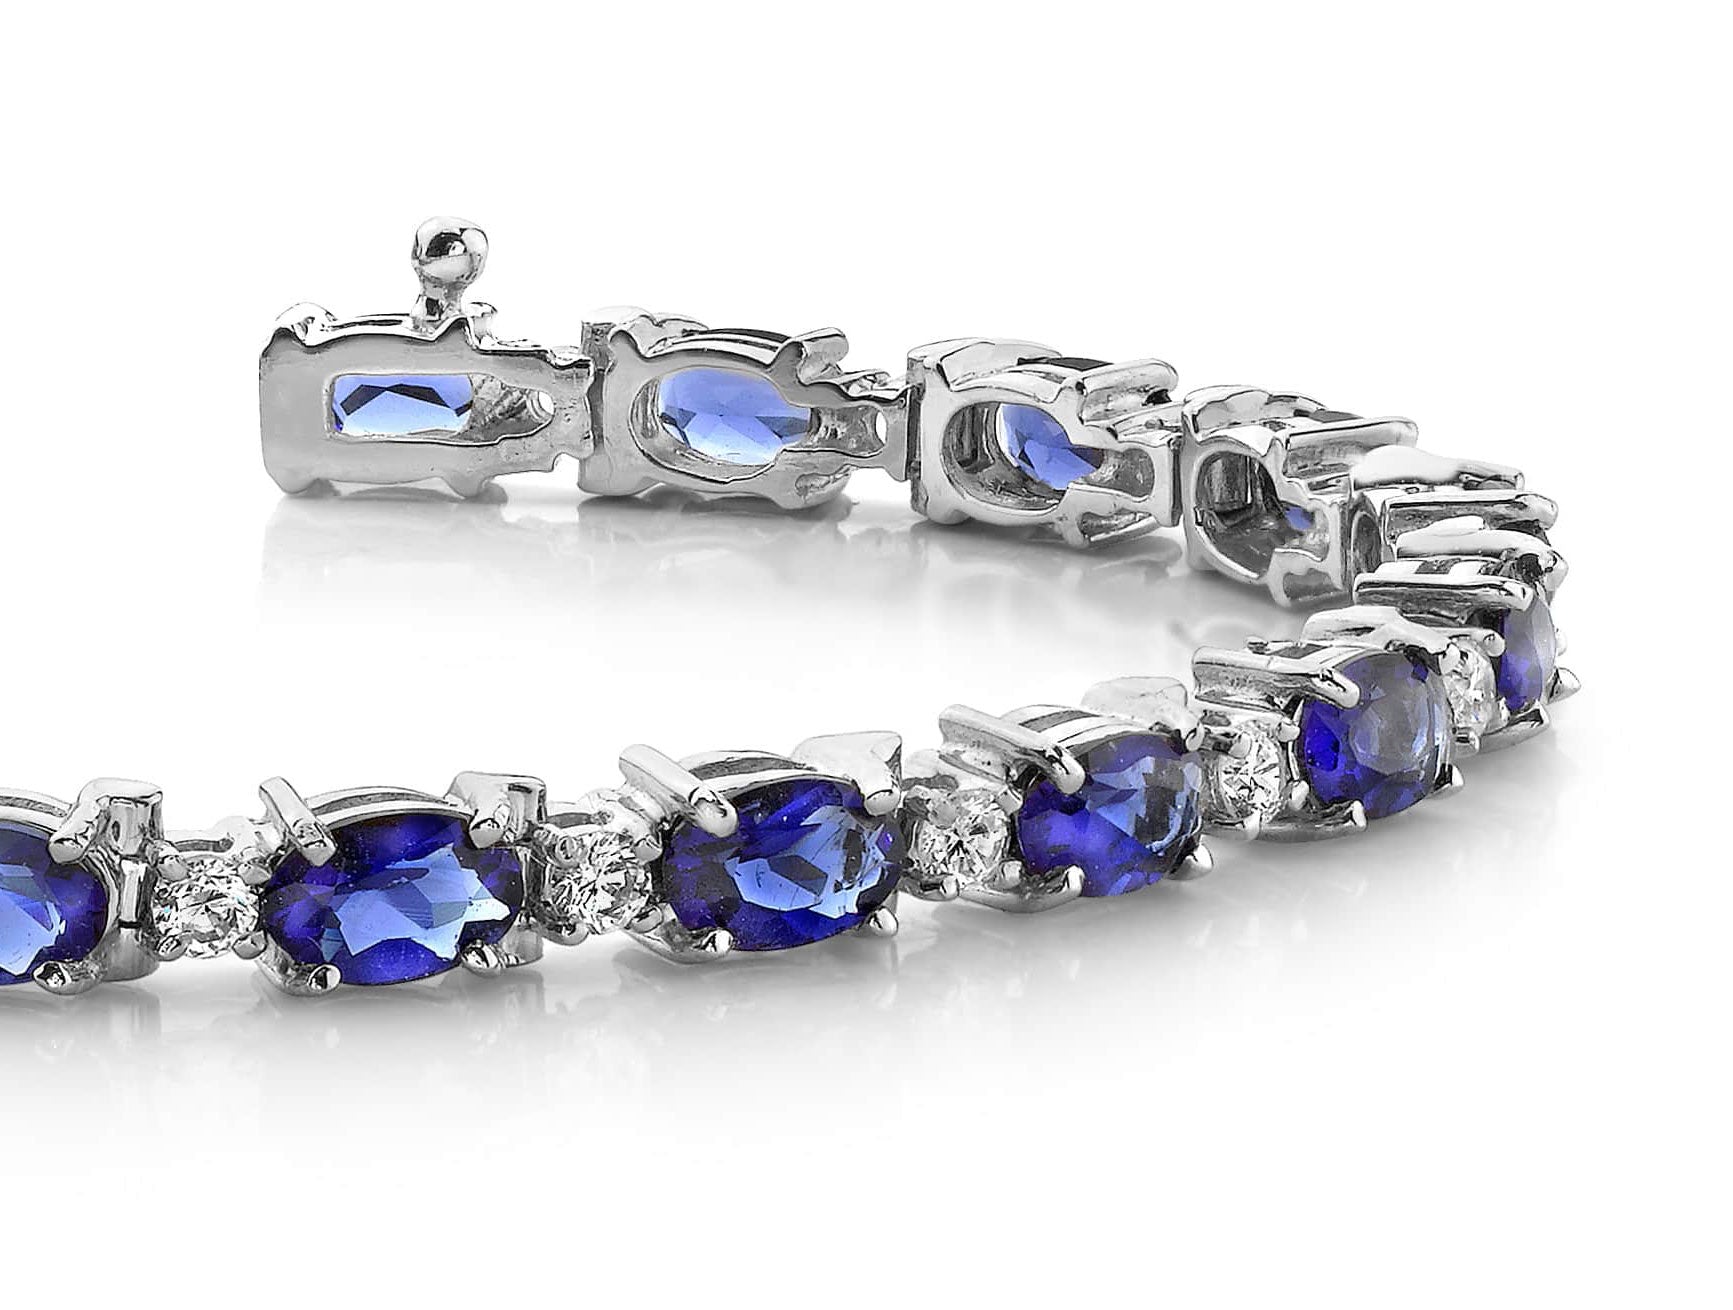 Elegant Diamond And Oval Colored Stone Bracelet Available In Platinum Or Gold